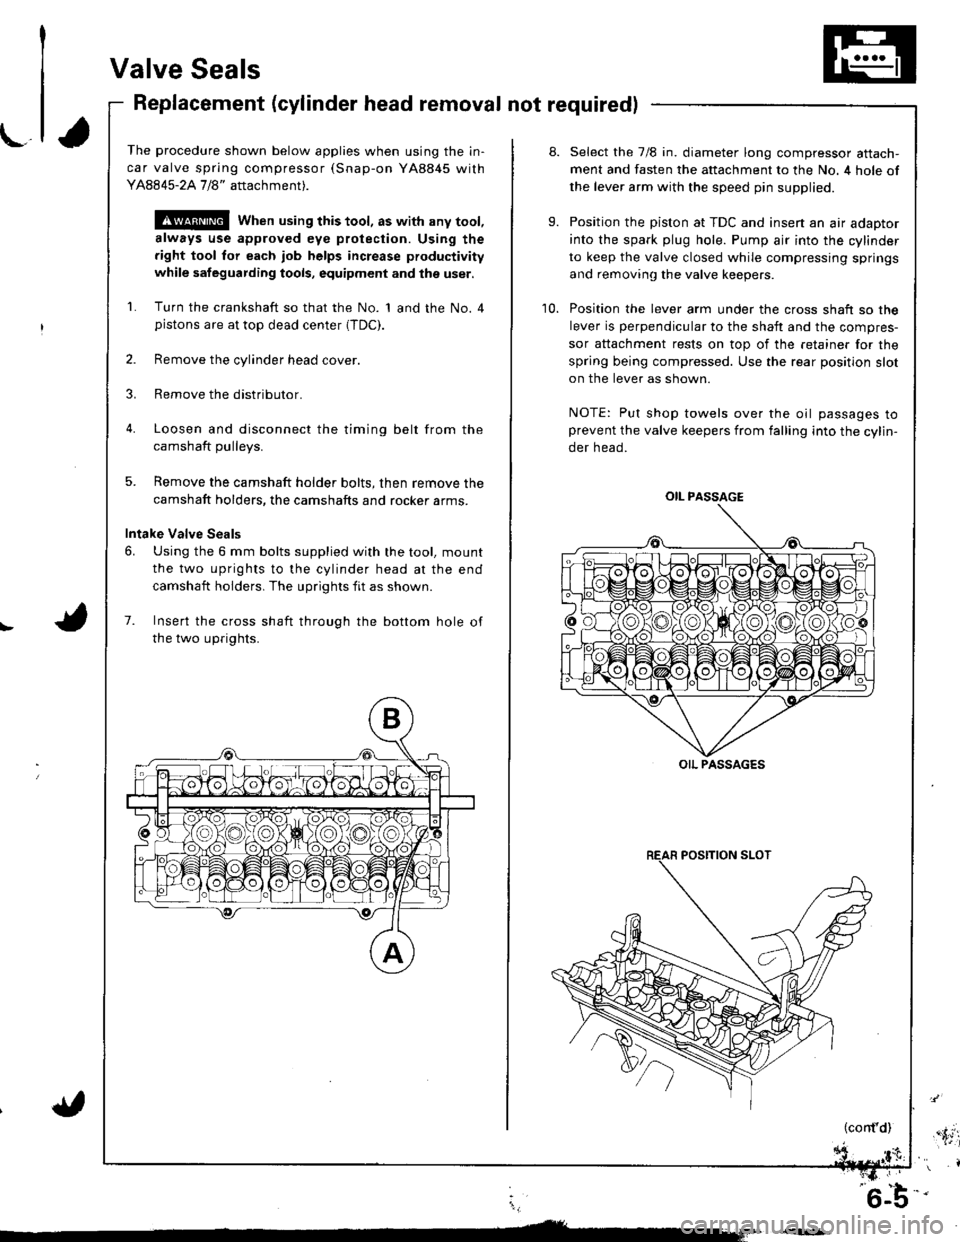 HONDA INTEGRA 1998 4.G Workshop Manual Valve Seals
Replacement (cylinder head removal not required)
The procedure shown below applies when using the in-
car valve spring compressor (Snap-on YA8845 with
Y AAA45-2A 1 /8" attachment).
!@@ Whe